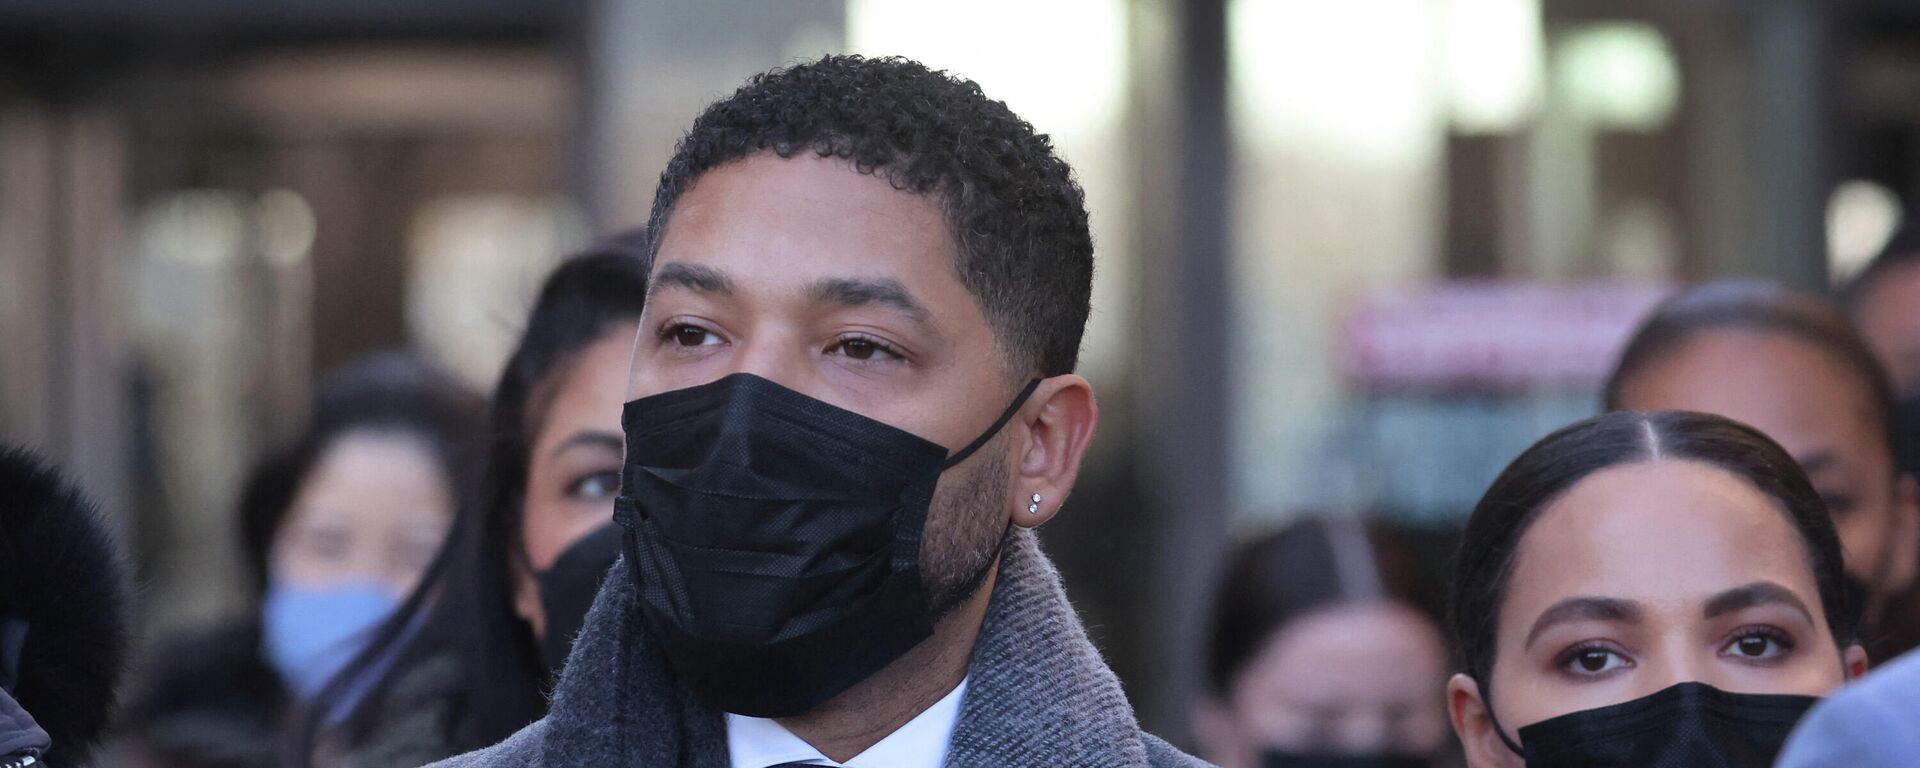 Former Empire actor Jussie Smollett leaves the Leighton Criminal Courts Building as the jury begins deliberation during his trial on December 8, 2021 in Chicago, Illinois. - Sputnik International, 1920, 09.12.2021